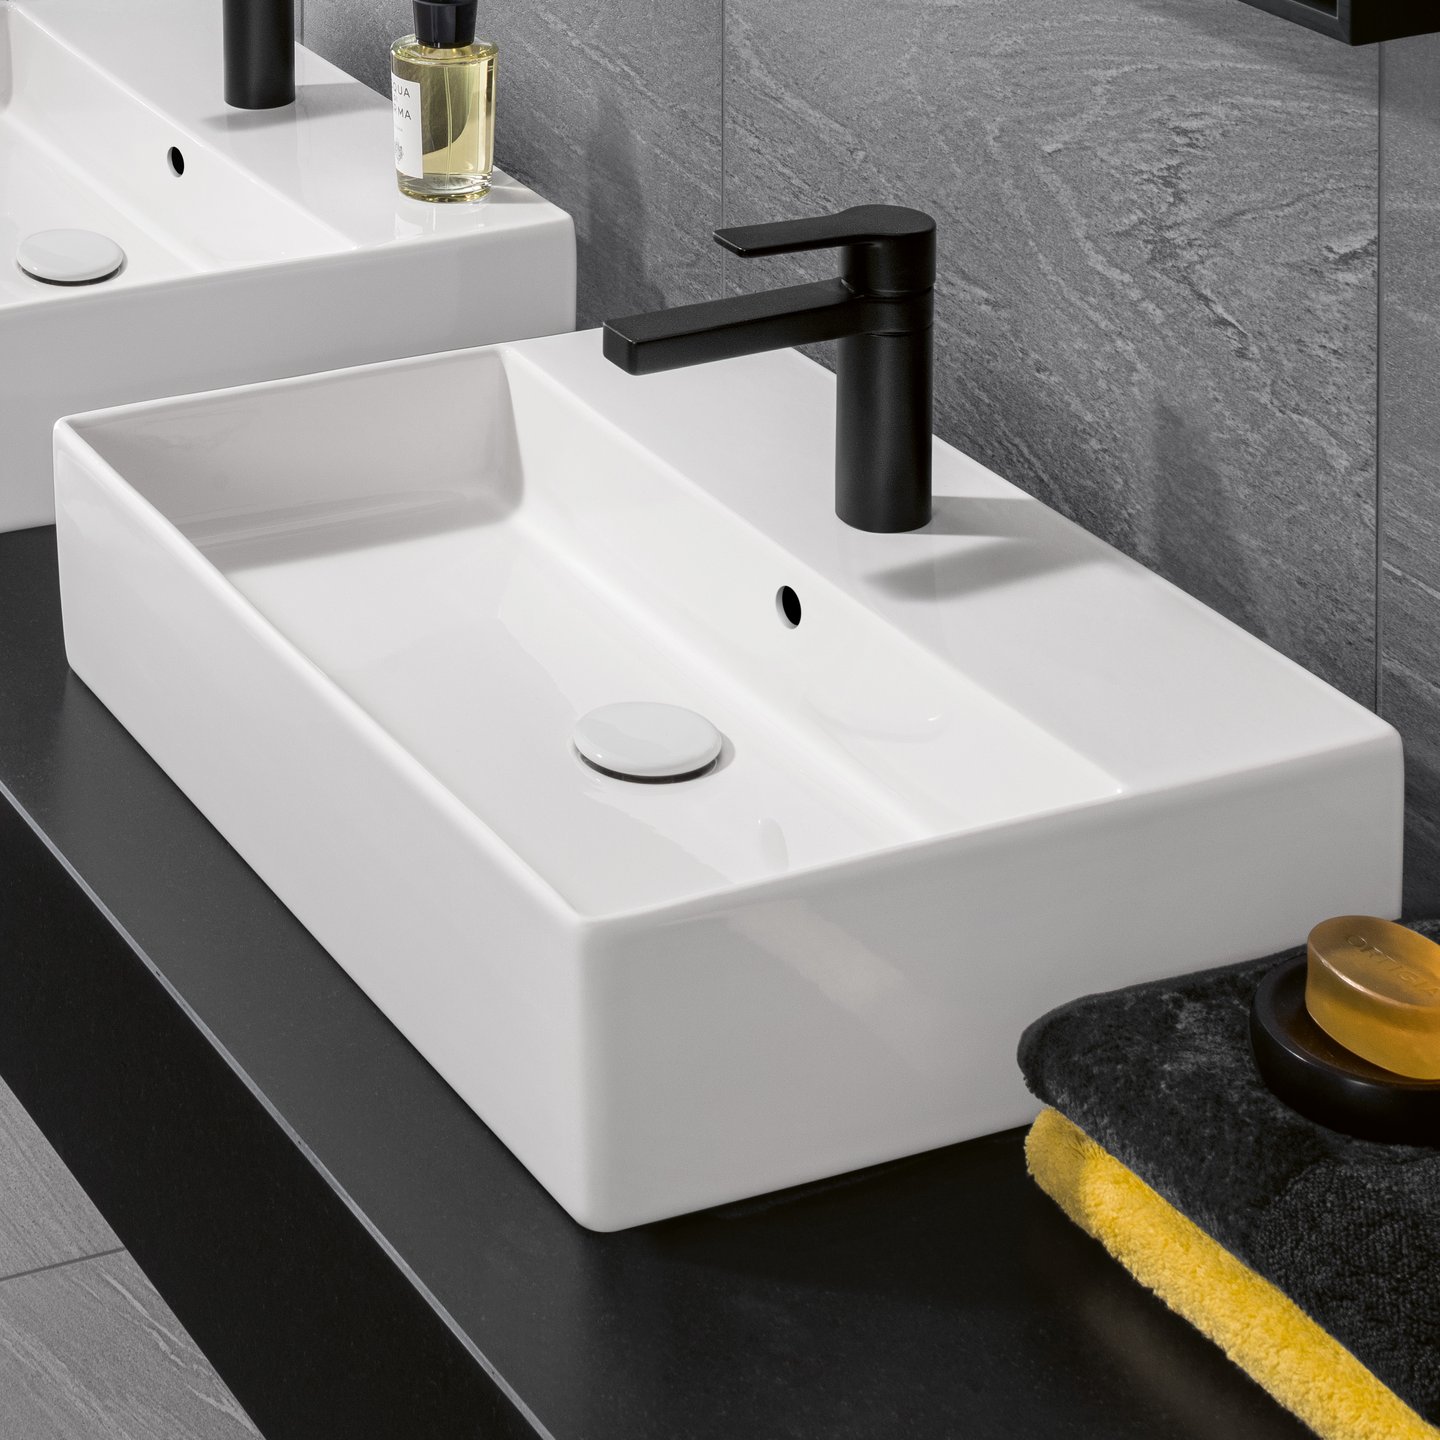 precedent toegang Ban Villeroy & Boch Memento 2.0 countertop washbasin white, with CeramicPlus,  with overflow - 4A0760R1 | REUTER